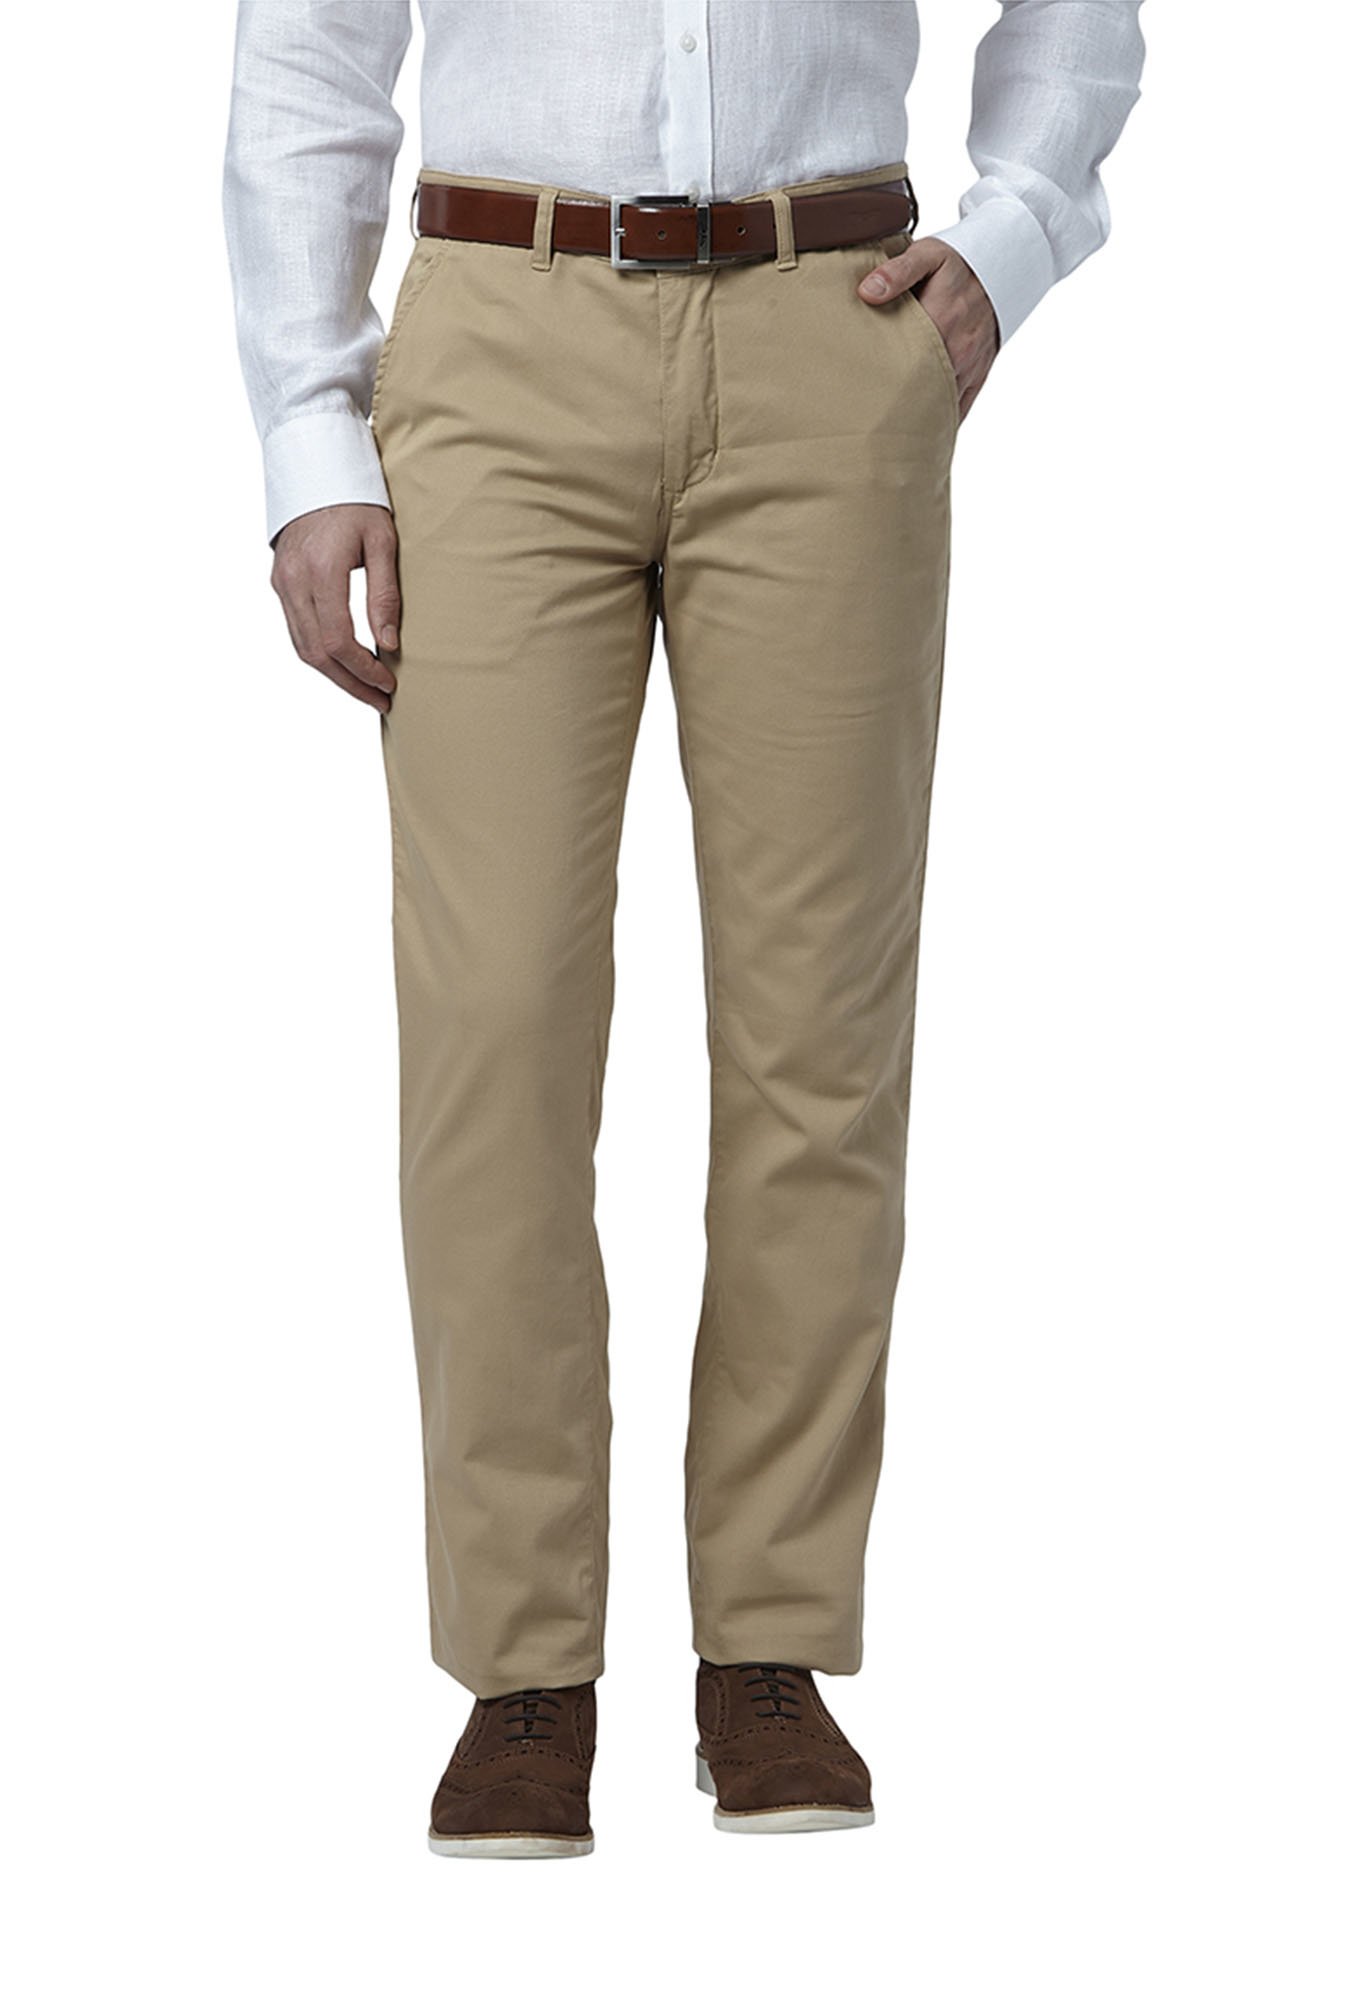 Buy ALLEN SOLLY Green Cotton Blend Regular Fit Mens Trousers  Shoppers Stop